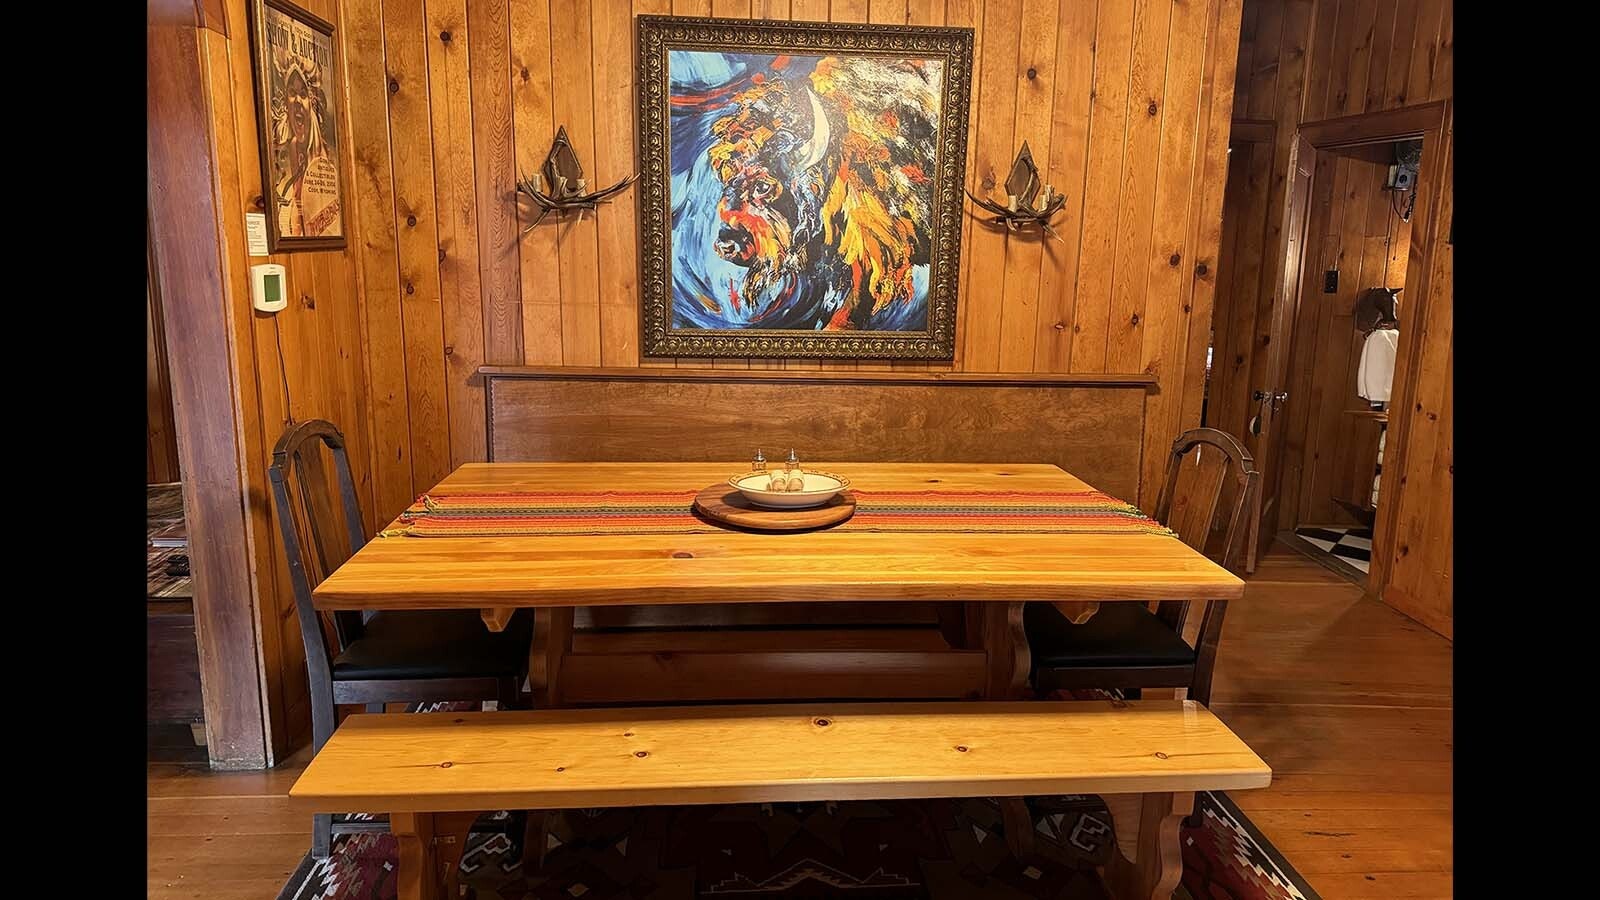 A table and wood paneling in the dining area of the Molesworth House in Cody.